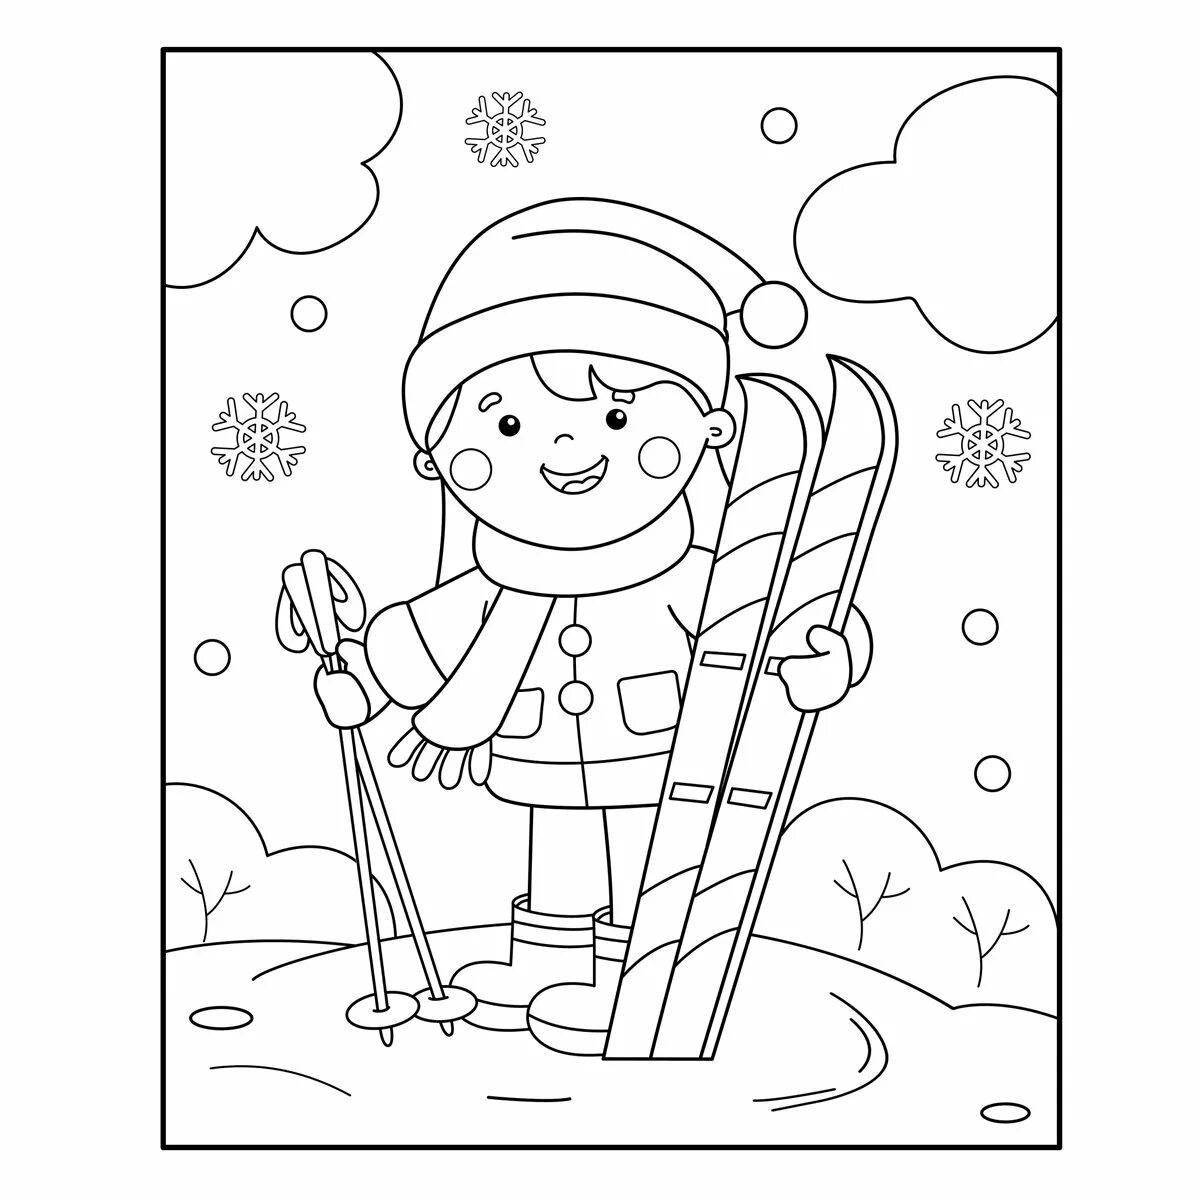 Happy skiing coloring page